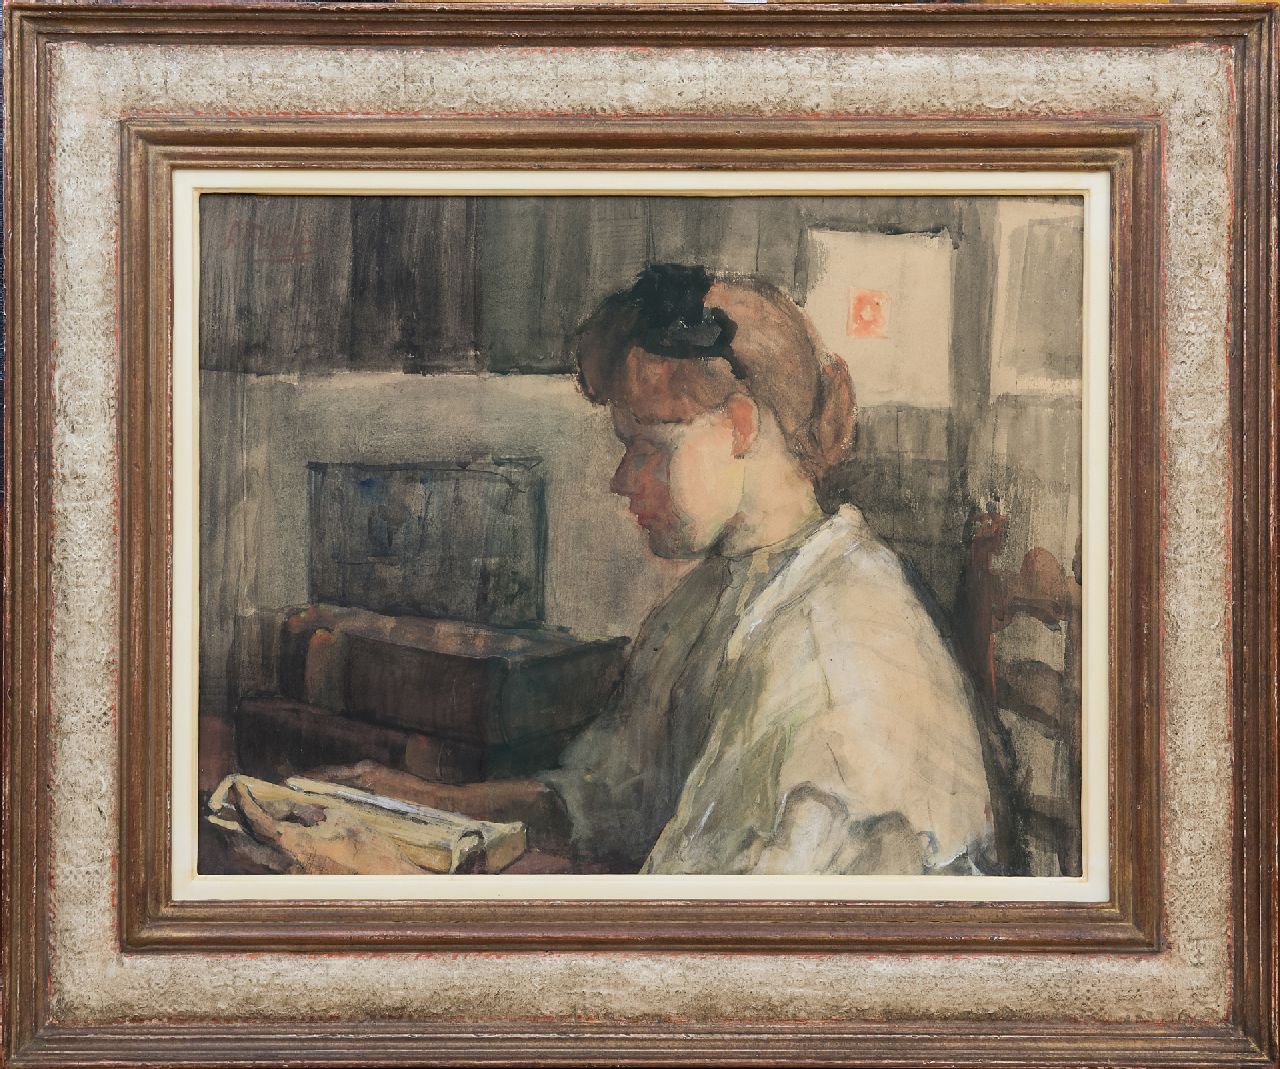 Fritzlin M.C.L.  | Maria Charlotta 'Louise' Fritzlin, A girl reading, watercolour on paper laid down on board 32.5 x 42.0 cm, signed u.l. and painted 1908